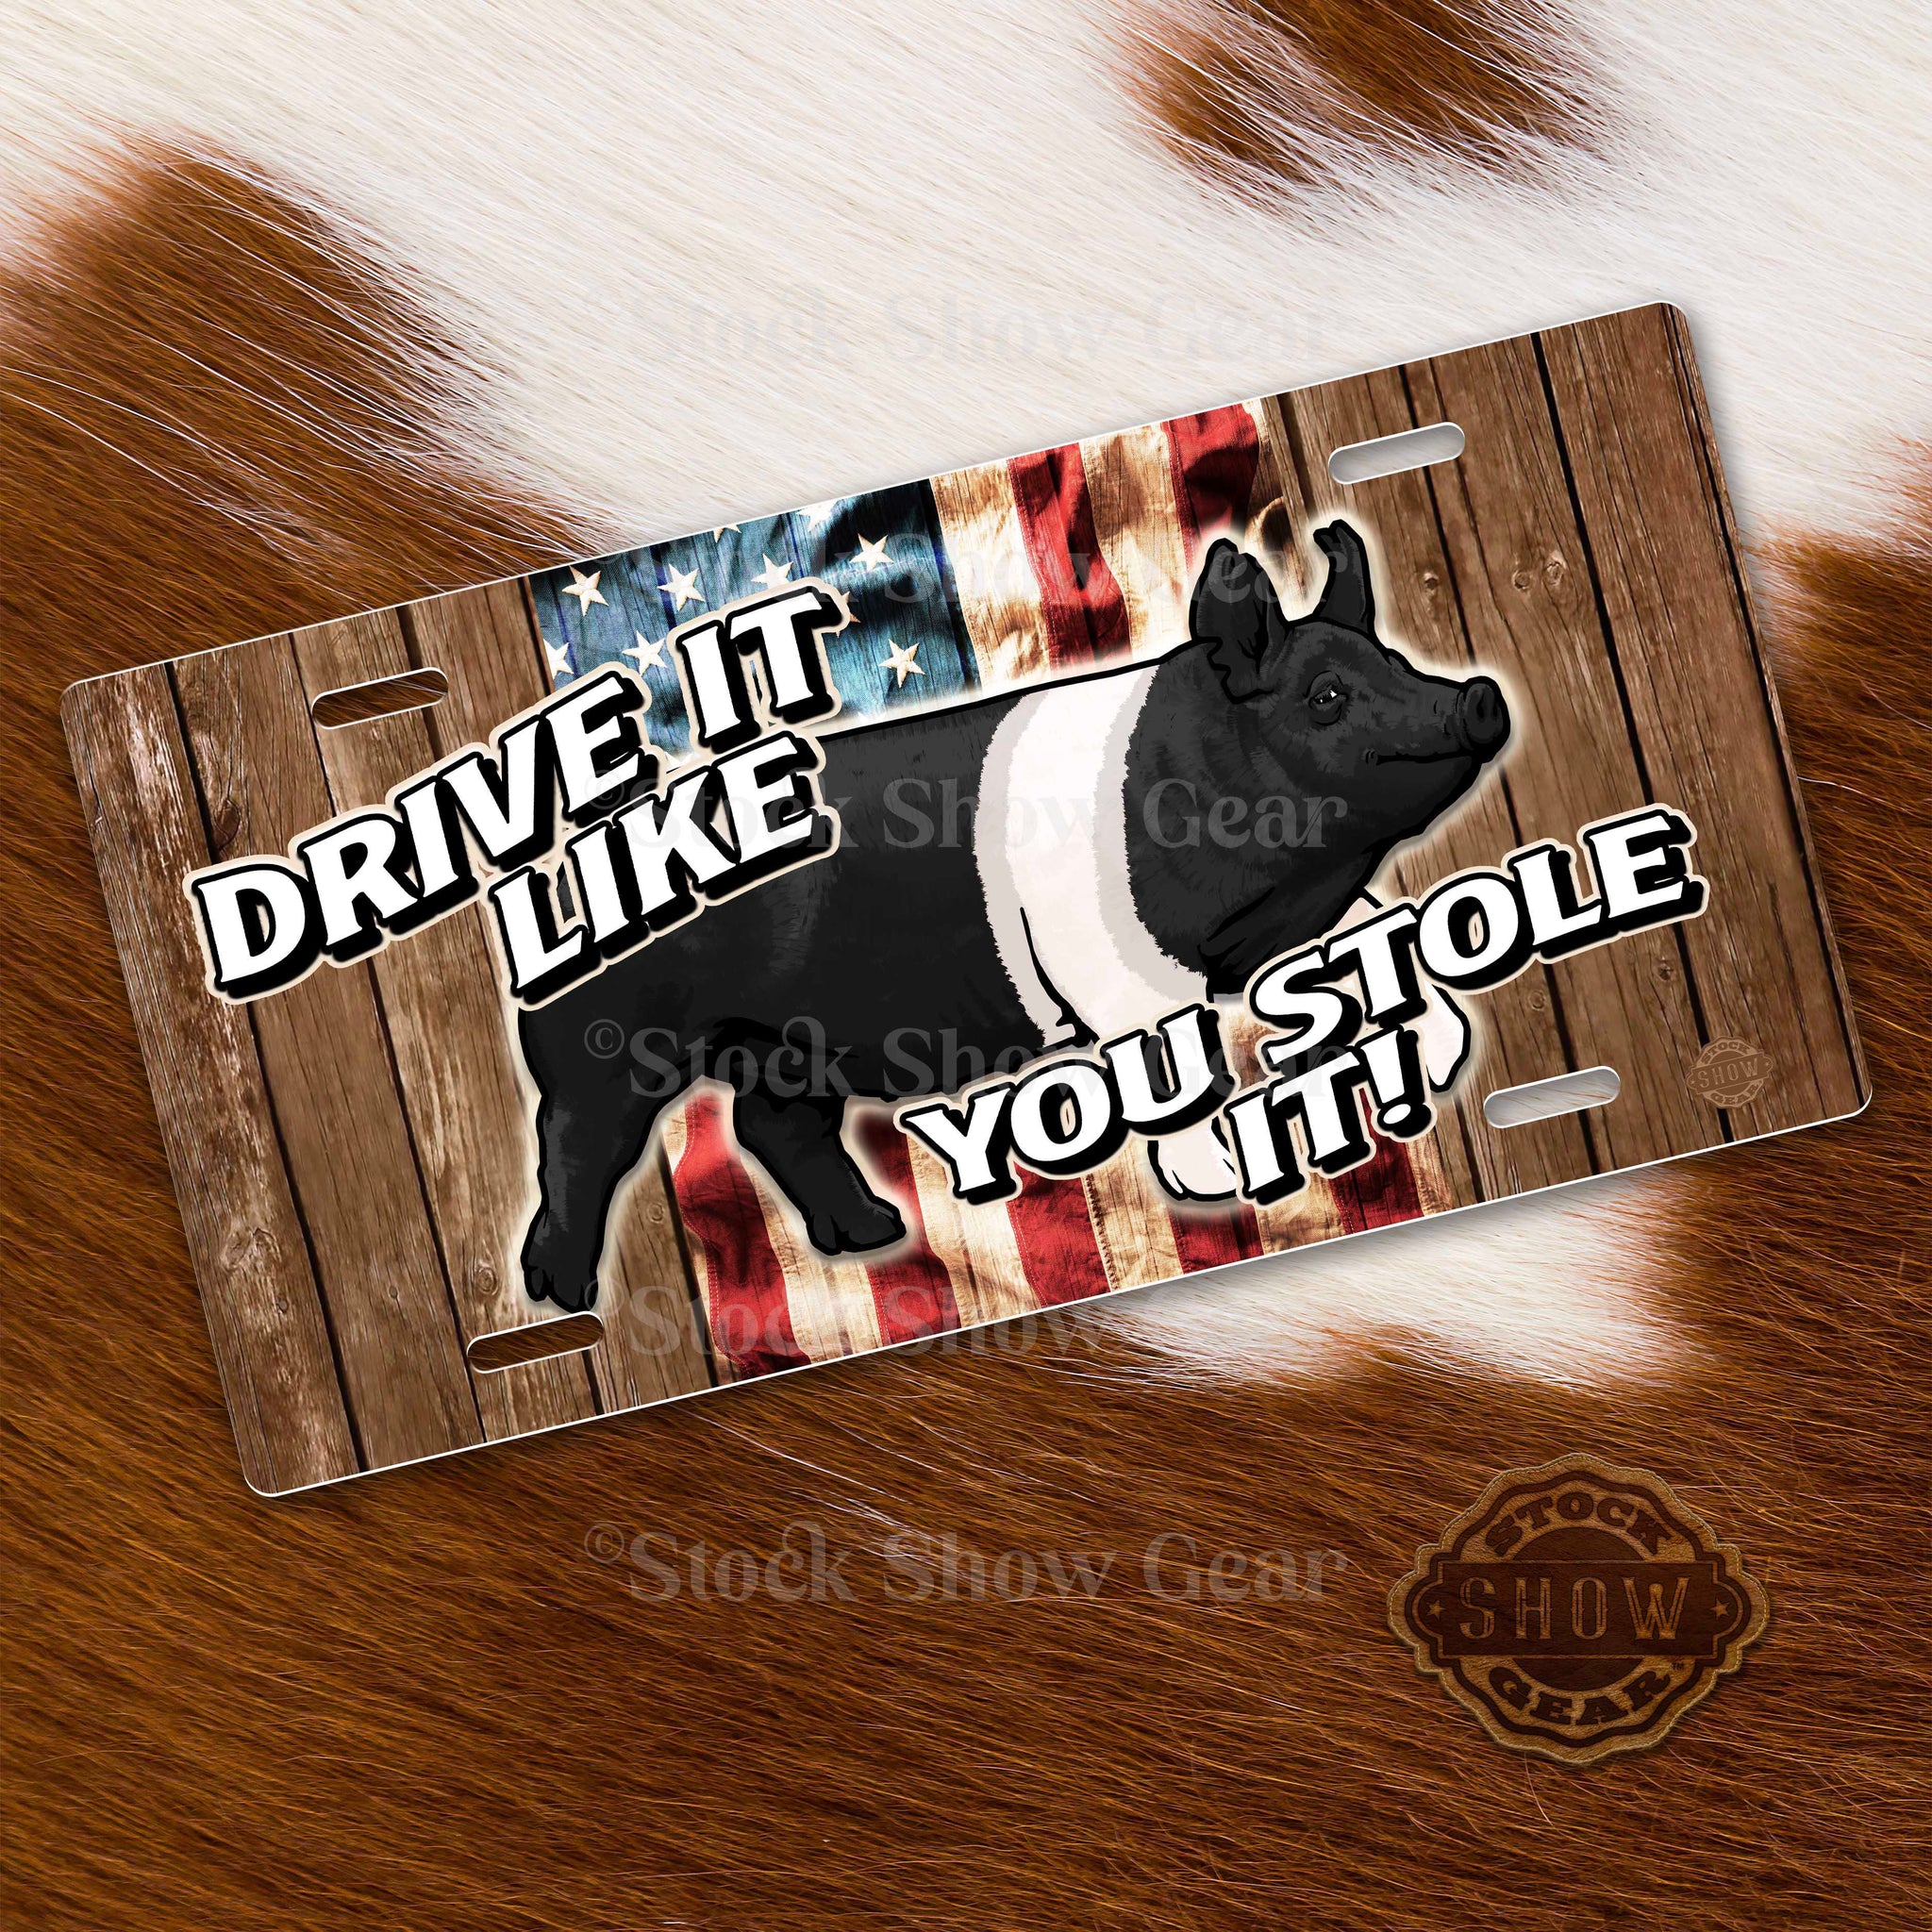 Hampshire Pig-"Drive It Like You Stole It" License Plates